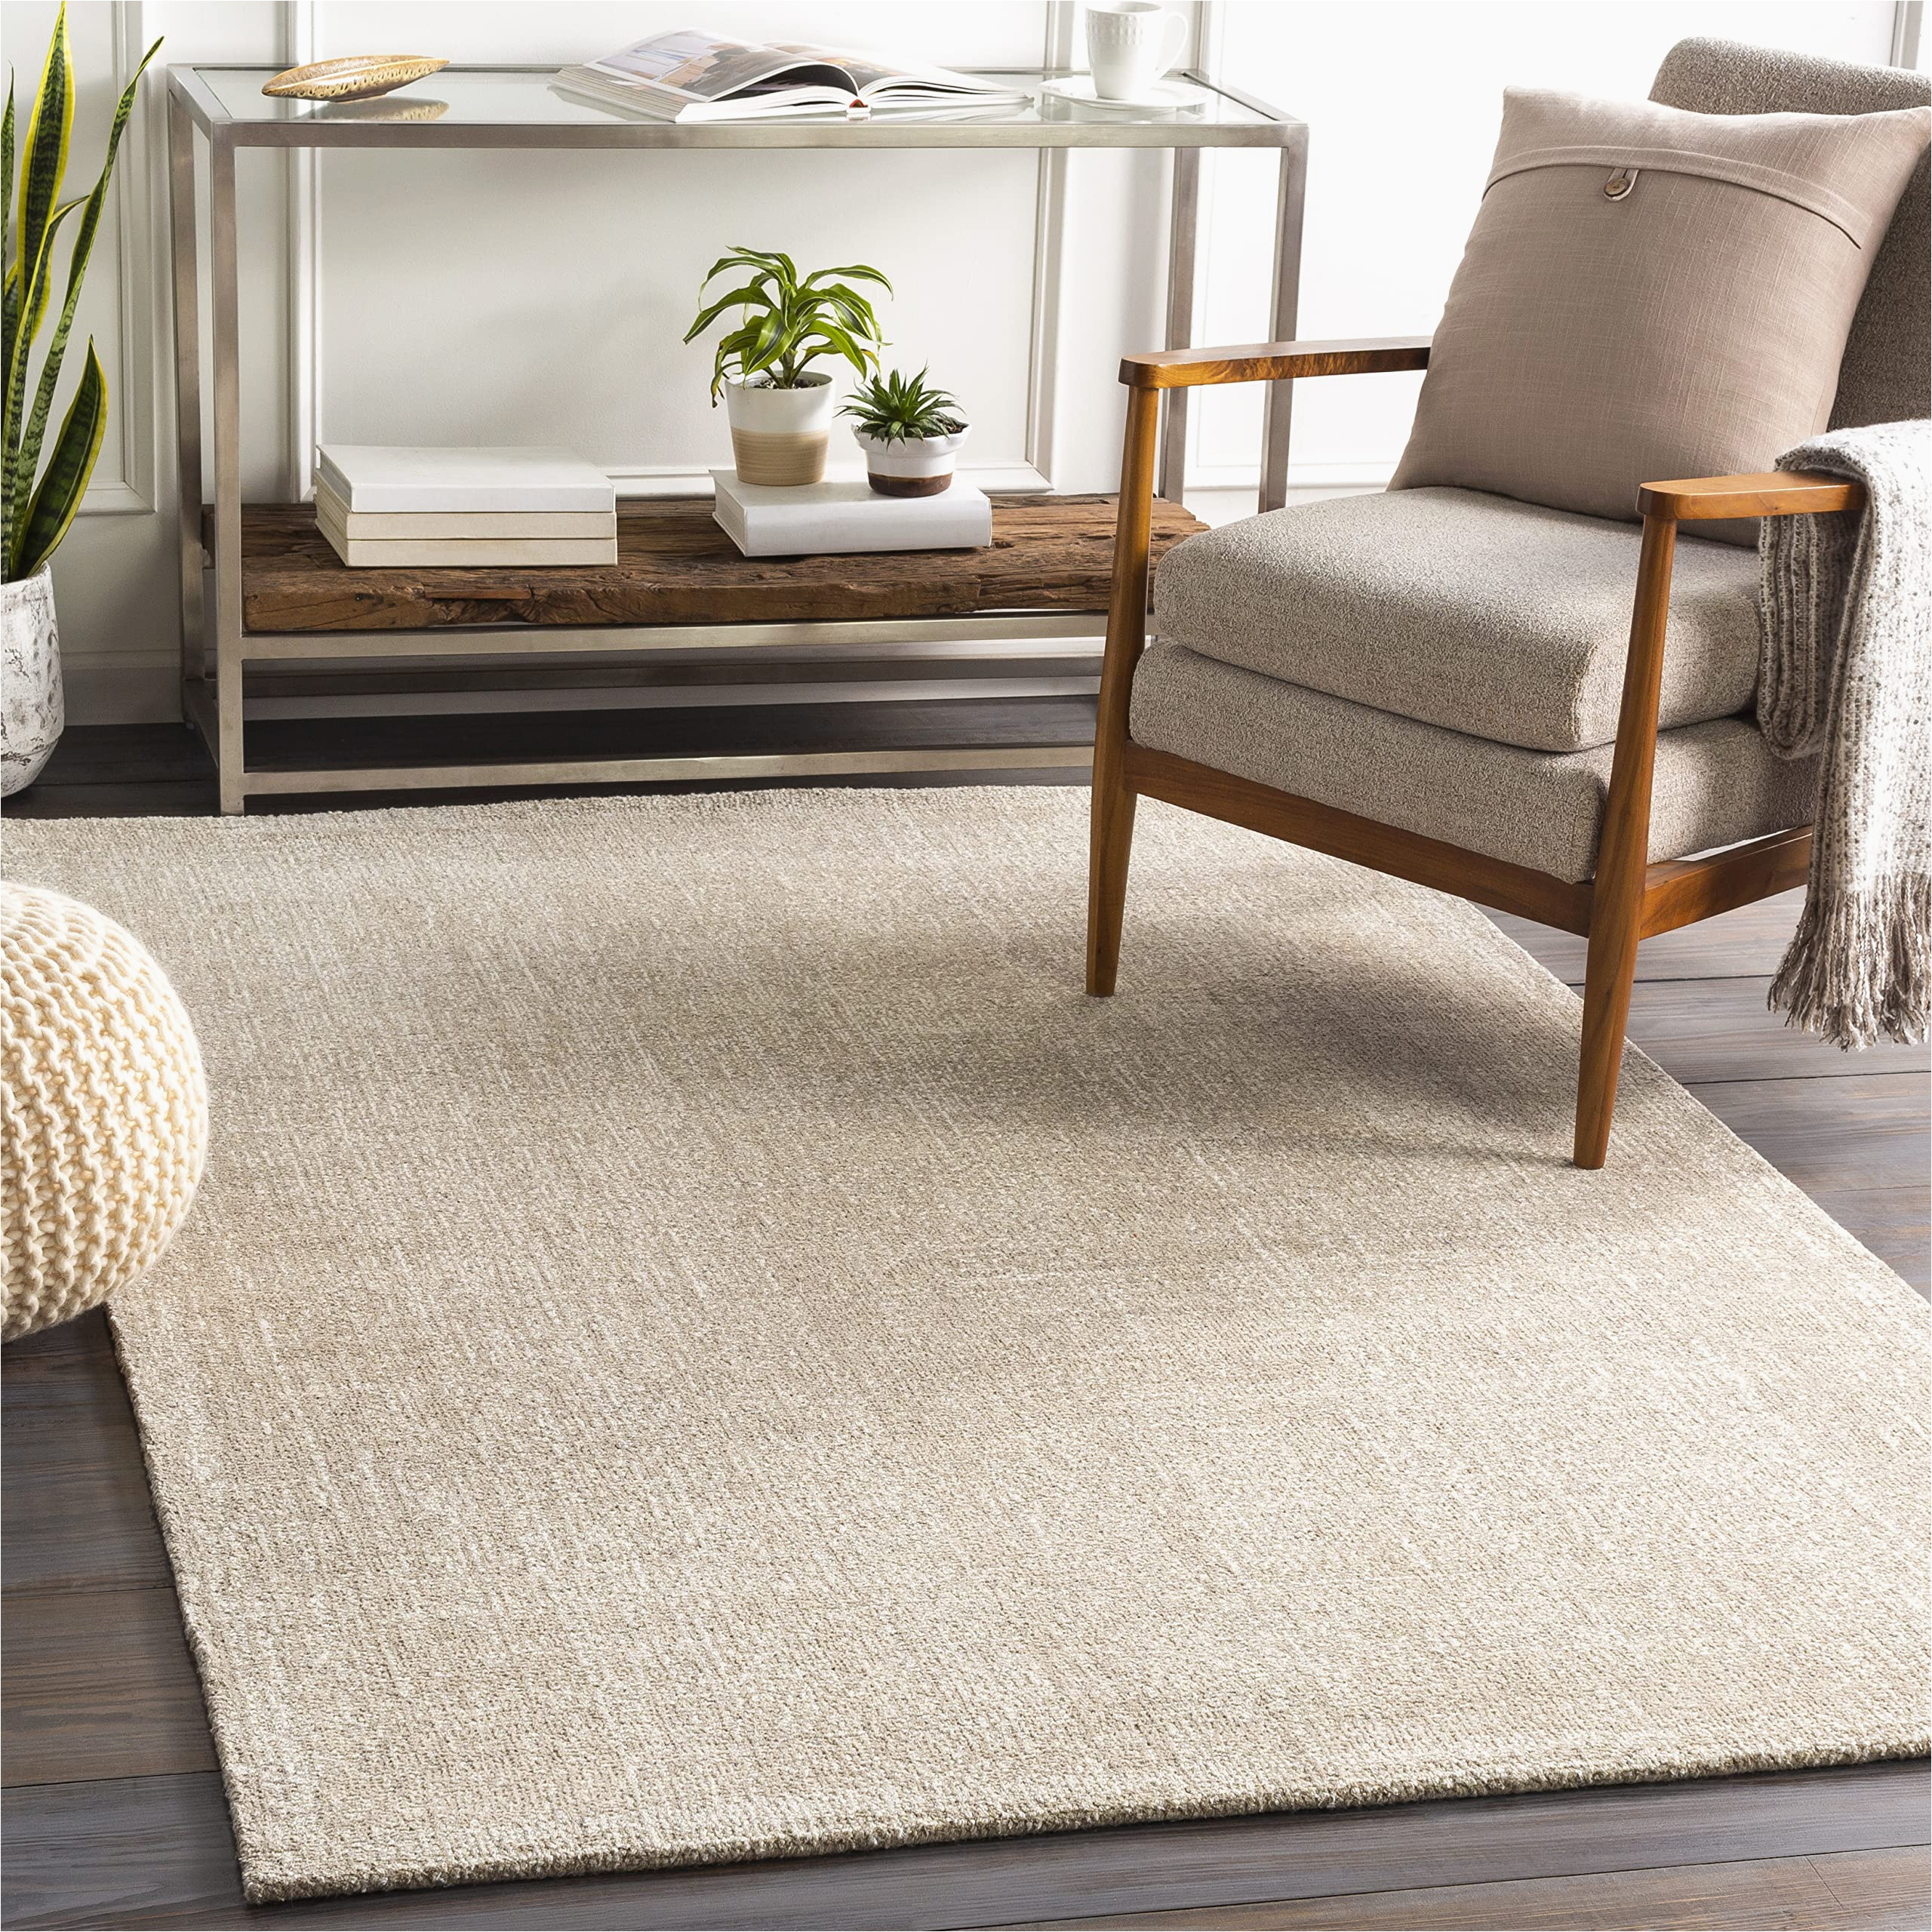 Solid Beige area Rug 8×10 Mark&day area Rugs, 8×10 Giles solid and Border Ivory area Rug Beige Cream Carpet for Living Room, Bedroom or Kitchen (8′ X 10′)